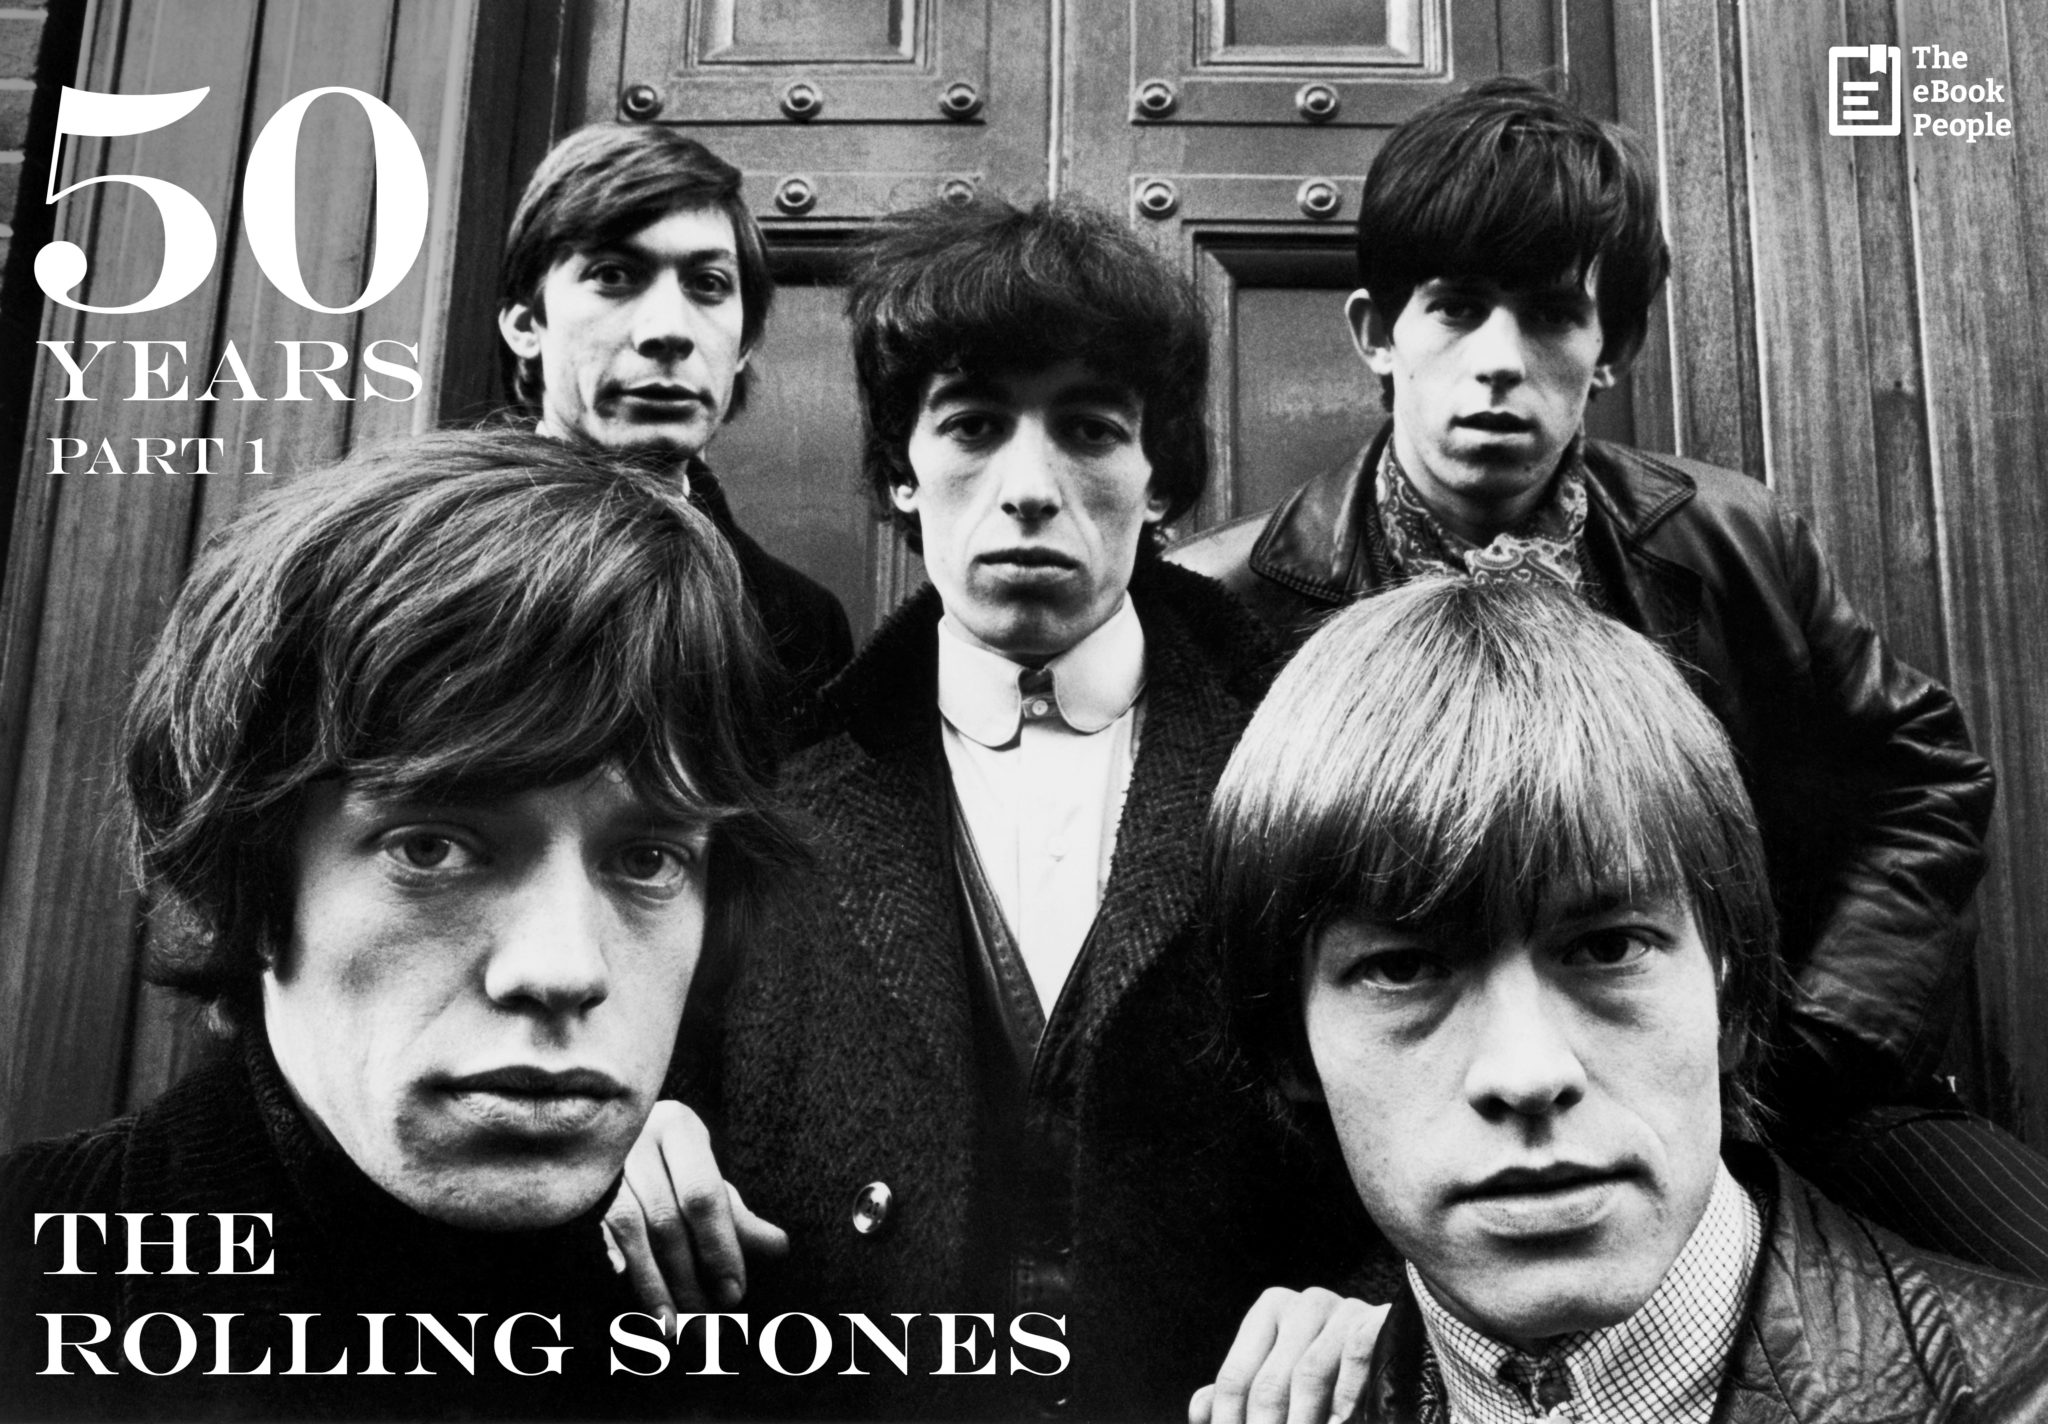 The Rolling Stones Facts - "I Wanna Be Your Man" (1963) Written By McCartney and Lennon